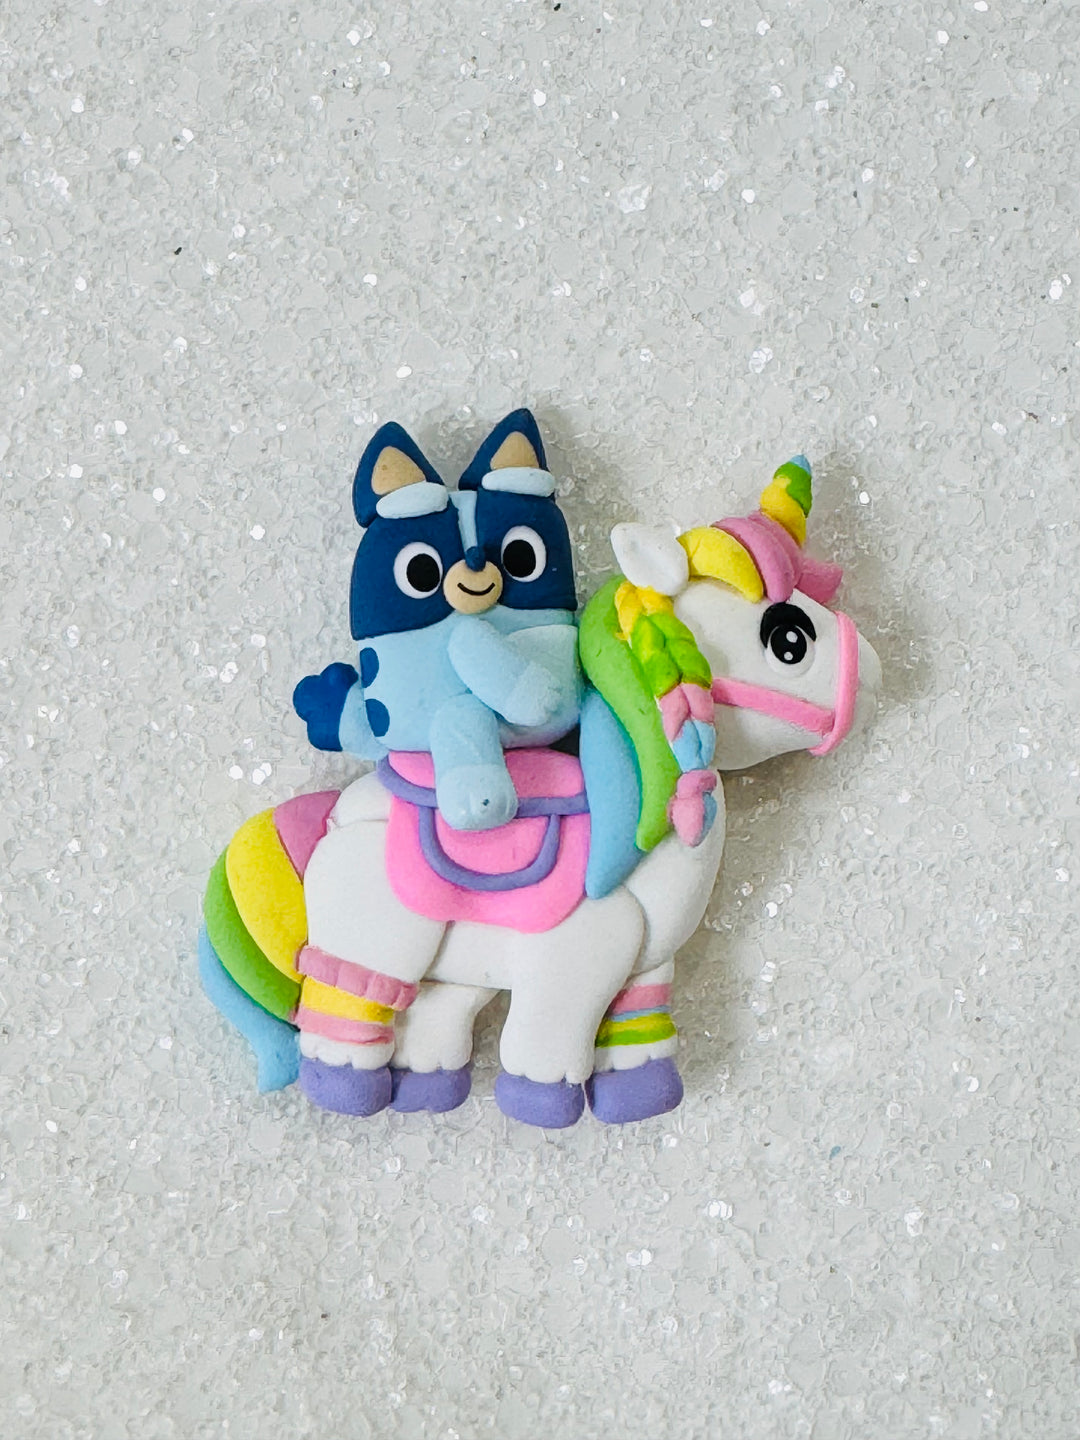 Pup on Unicorn Clay from Temptress Maker